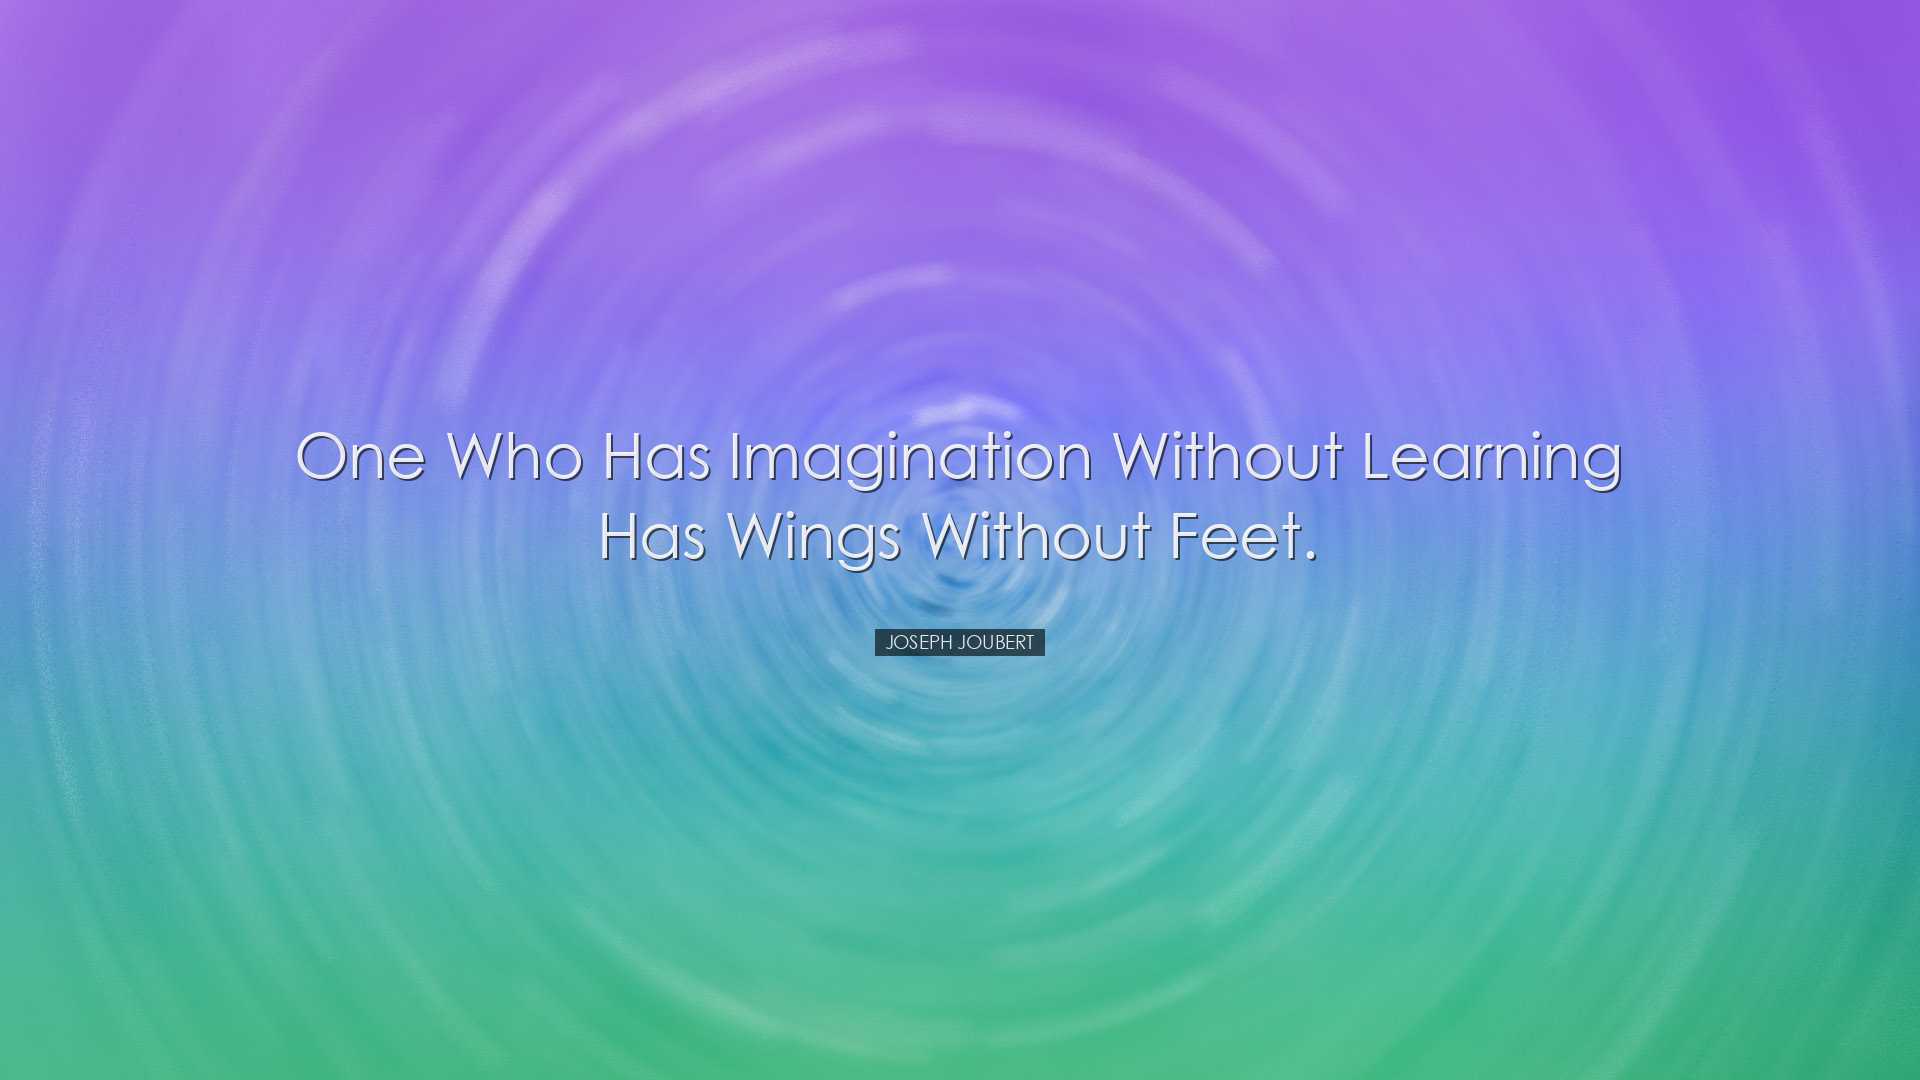 One who has imagination without learning has wings without feet. -